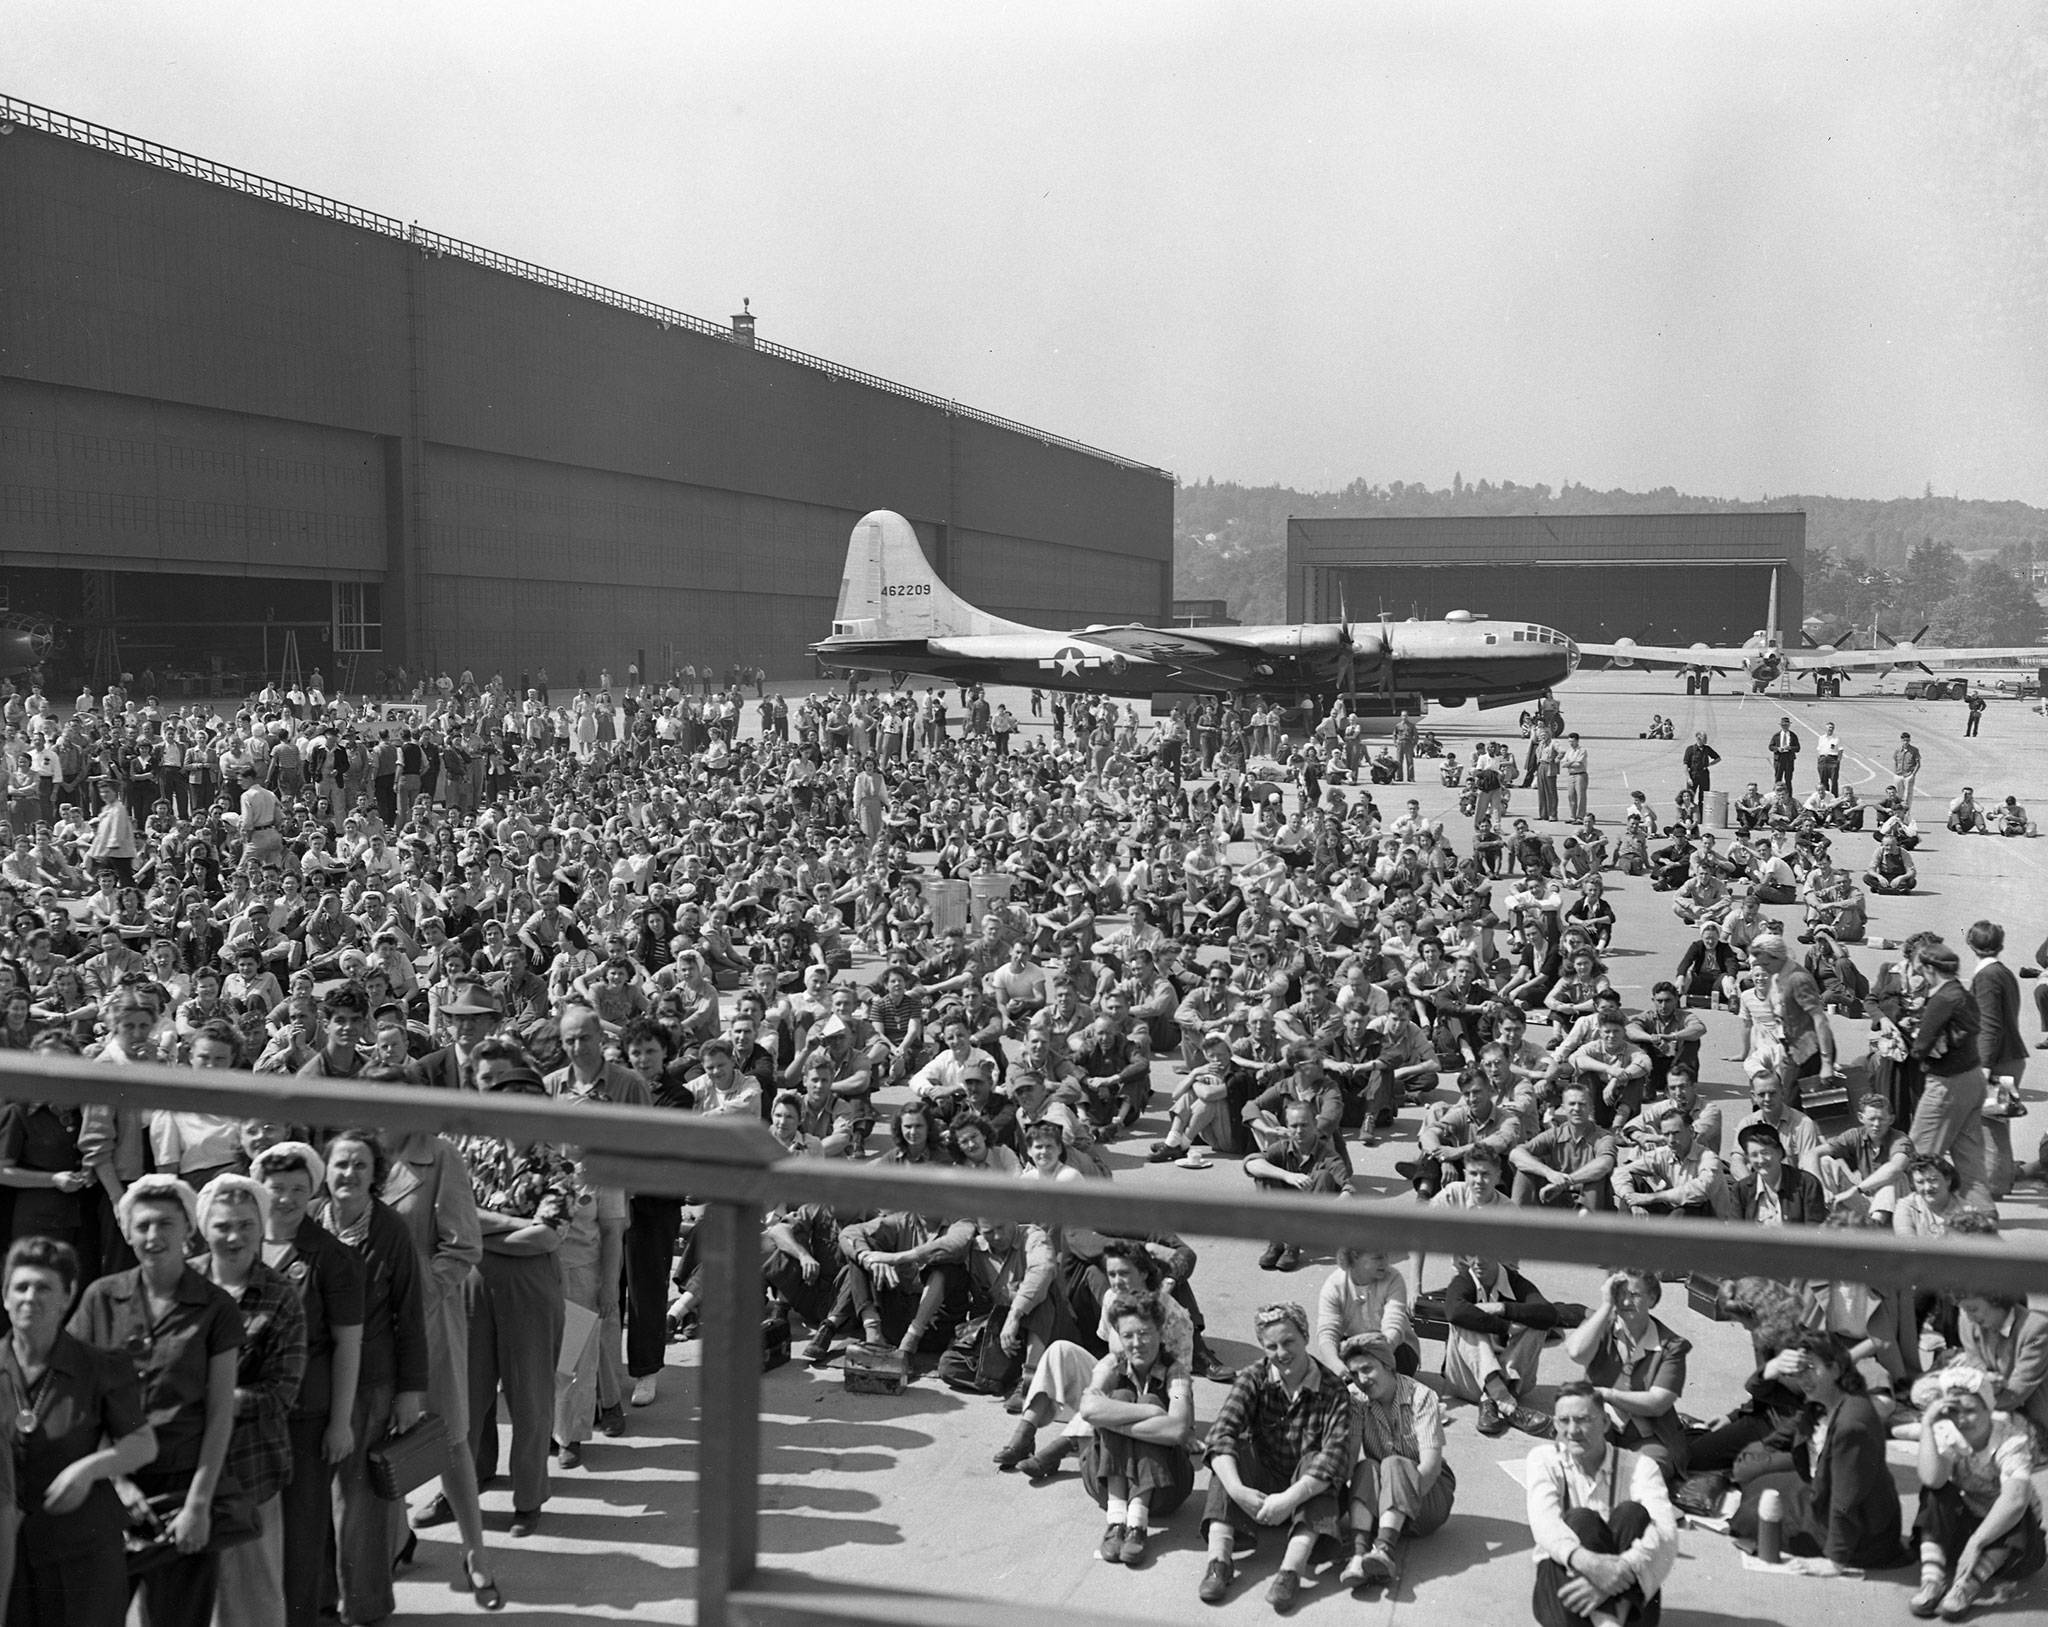 The assembly process at Renton for B-29s used four moving assembly lines. The 1,000 B-29 produced is seen above.